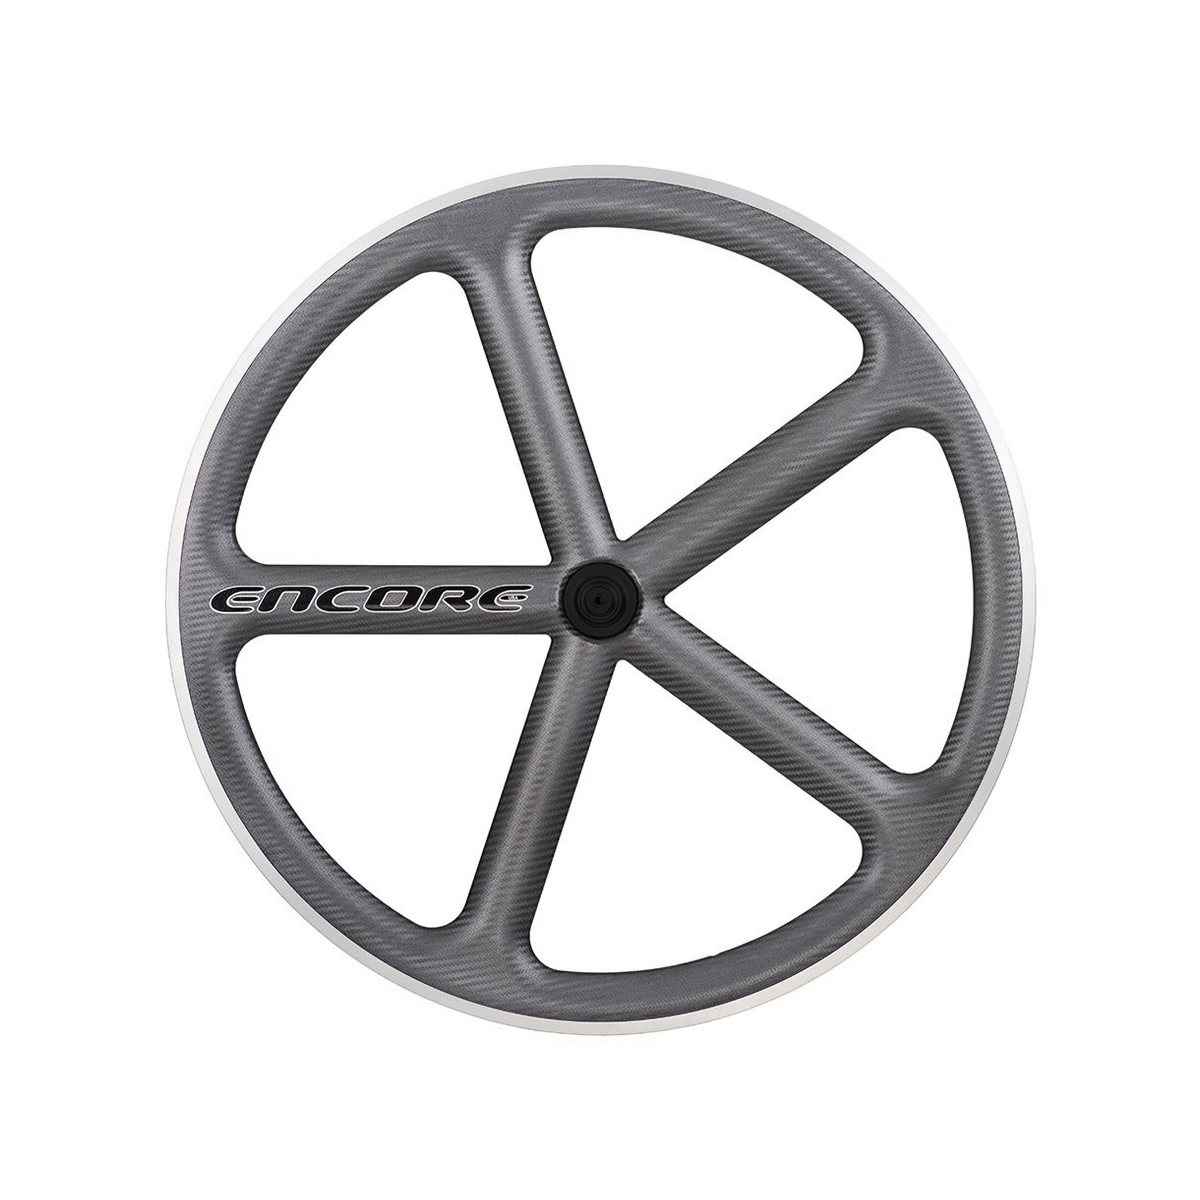 rear wheel 700c track 5 spokes carbon weave charcoal msw